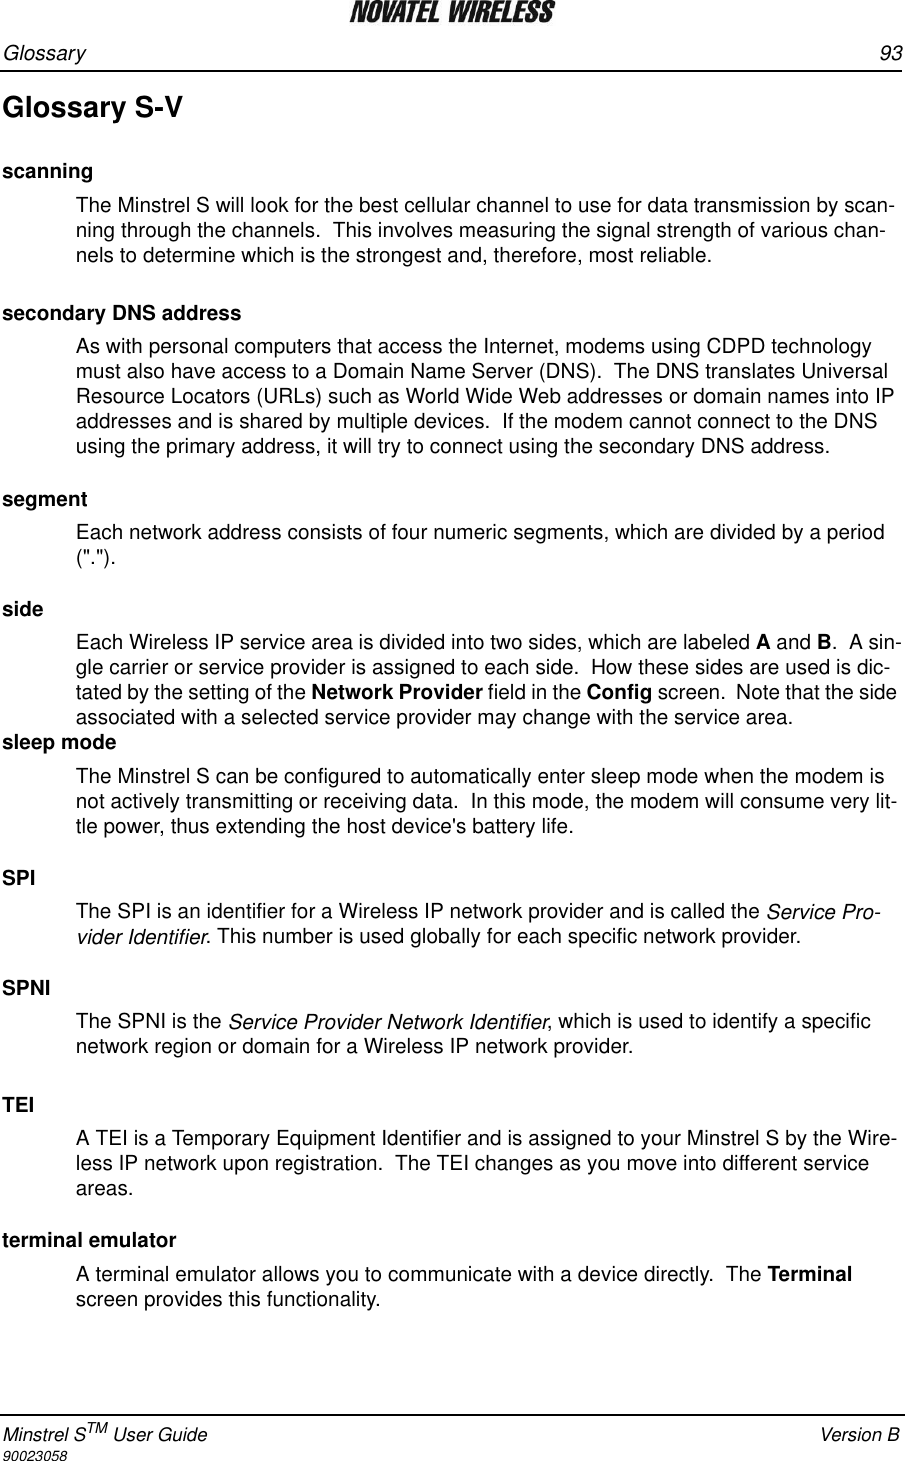 Glossary 93Minstrel STM User Guide Version B90023058Glossary S-VscanningThe Minstrel S will look for the best cellular channel to use for data transmission by scan-ning through the channels.  This involves measuring the signal strength of various chan-nels to determine which is the strongest and, therefore, most reliable.   secondary DNS addressAs with personal computers that access the Internet, modems using CDPD technology must also have access to a Domain Name Server (DNS).  The DNS translates Universal Resource Locators (URLs) such as World Wide Web addresses or domain names into IP addresses and is shared by multiple devices.  If the modem cannot connect to the DNS using the primary address, it will try to connect using the secondary DNS address.segmentEach network address consists of four numeric segments, which are divided by a period (&quot;.&quot;).  sideEach Wireless IP service area is divided into two sides, which are labeled A and B.  A sin-gle carrier or service provider is assigned to each side.  How these sides are used is dic-tated by the setting of the Network Provider field in the Config screen.  Note that the side associated with a selected service provider may change with the service area.  sleep modeThe Minstrel S can be configured to automatically enter sleep mode when the modem is not actively transmitting or receiving data.  In this mode, the modem will consume very lit-tle power, thus extending the host device&apos;s battery life.SPIThe SPI is an identifier for a Wireless IP network provider and is called the Service Pro-vider Identifier. This number is used globally for each specific network provider. SPNIThe SPNI is the Service Provider Network Identifier, which is used to identify a specific network region or domain for a Wireless IP network provider.TEIA TEI is a Temporary Equipment Identifier and is assigned to your Minstrel S by the Wire-less IP network upon registration.  The TEI changes as you move into different service areas.terminal emulatorA terminal emulator allows you to communicate with a device directly.  The Terminal screen provides this functionality.